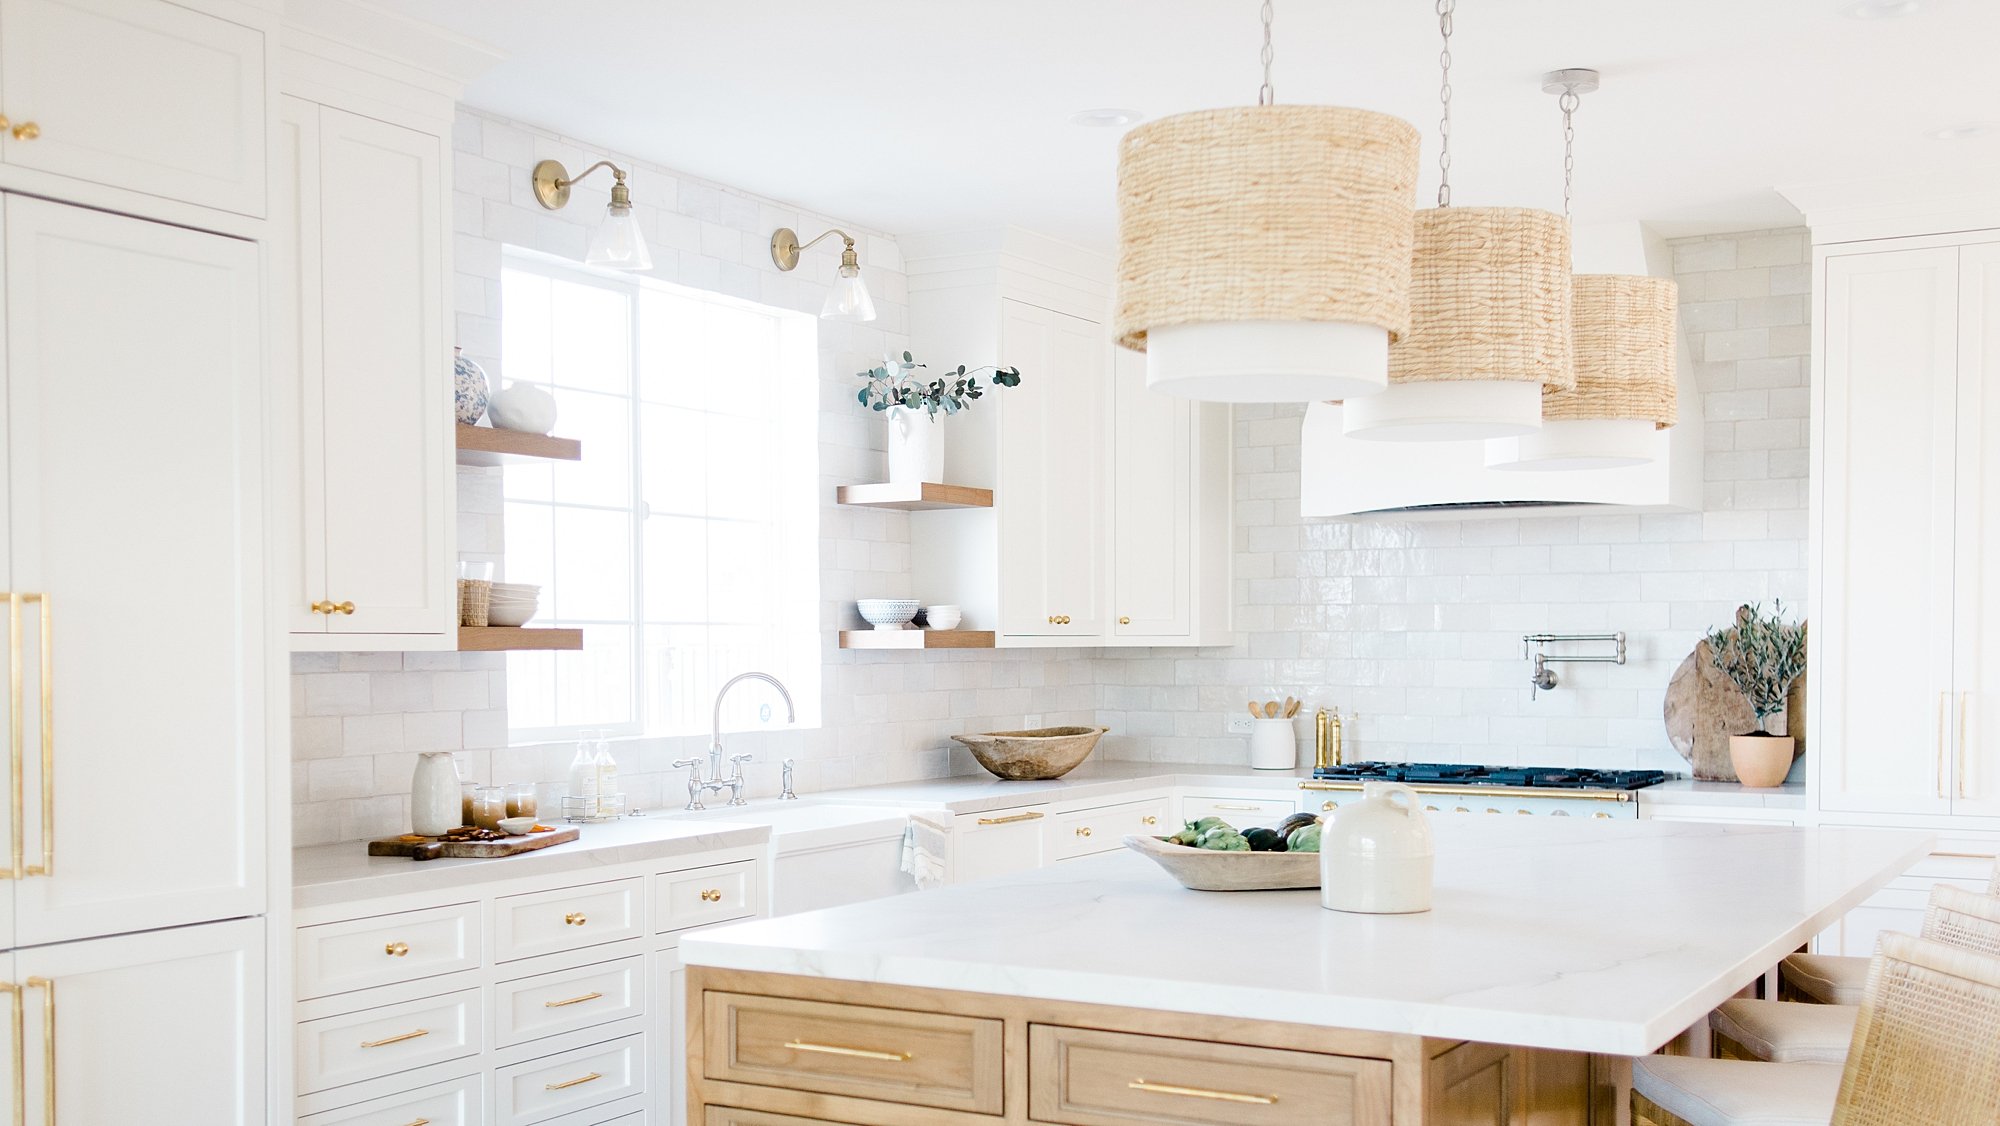  Project Jolie Kitchen Remodel: Blending French Country and San Diego Coastal Inspiration by Keri Michelle Interiors, a San Diego interior designer  